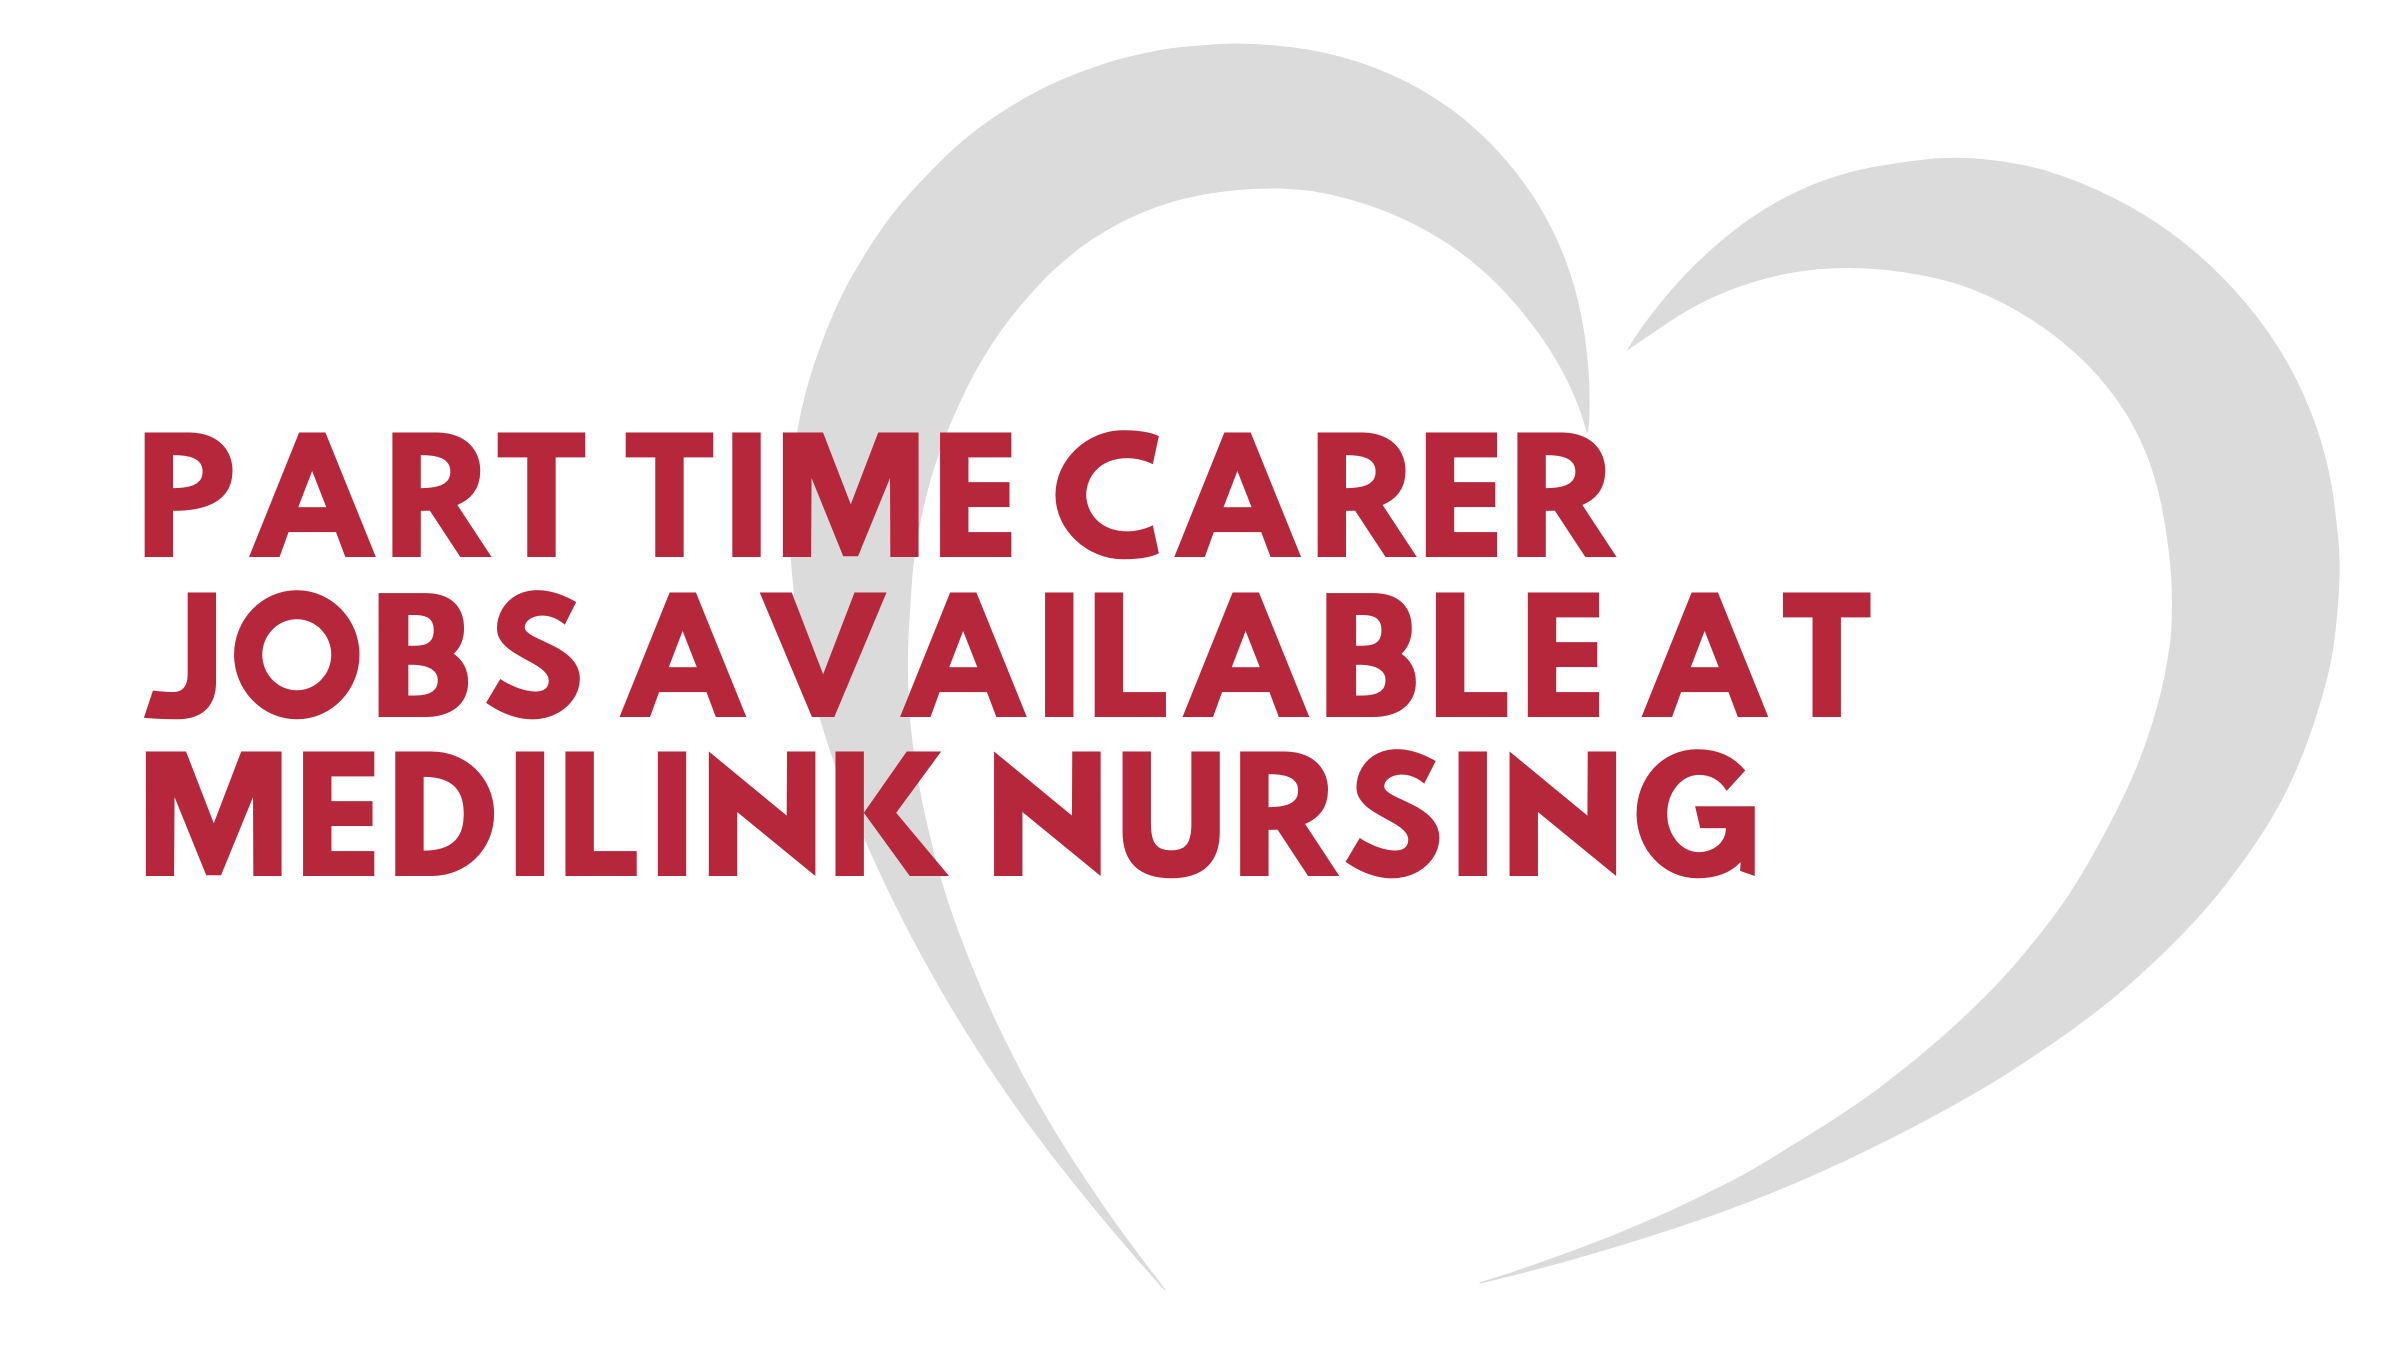 Part Time Carer Jobs At Medilink Nursing – Apply Quickly In 5 Minutes